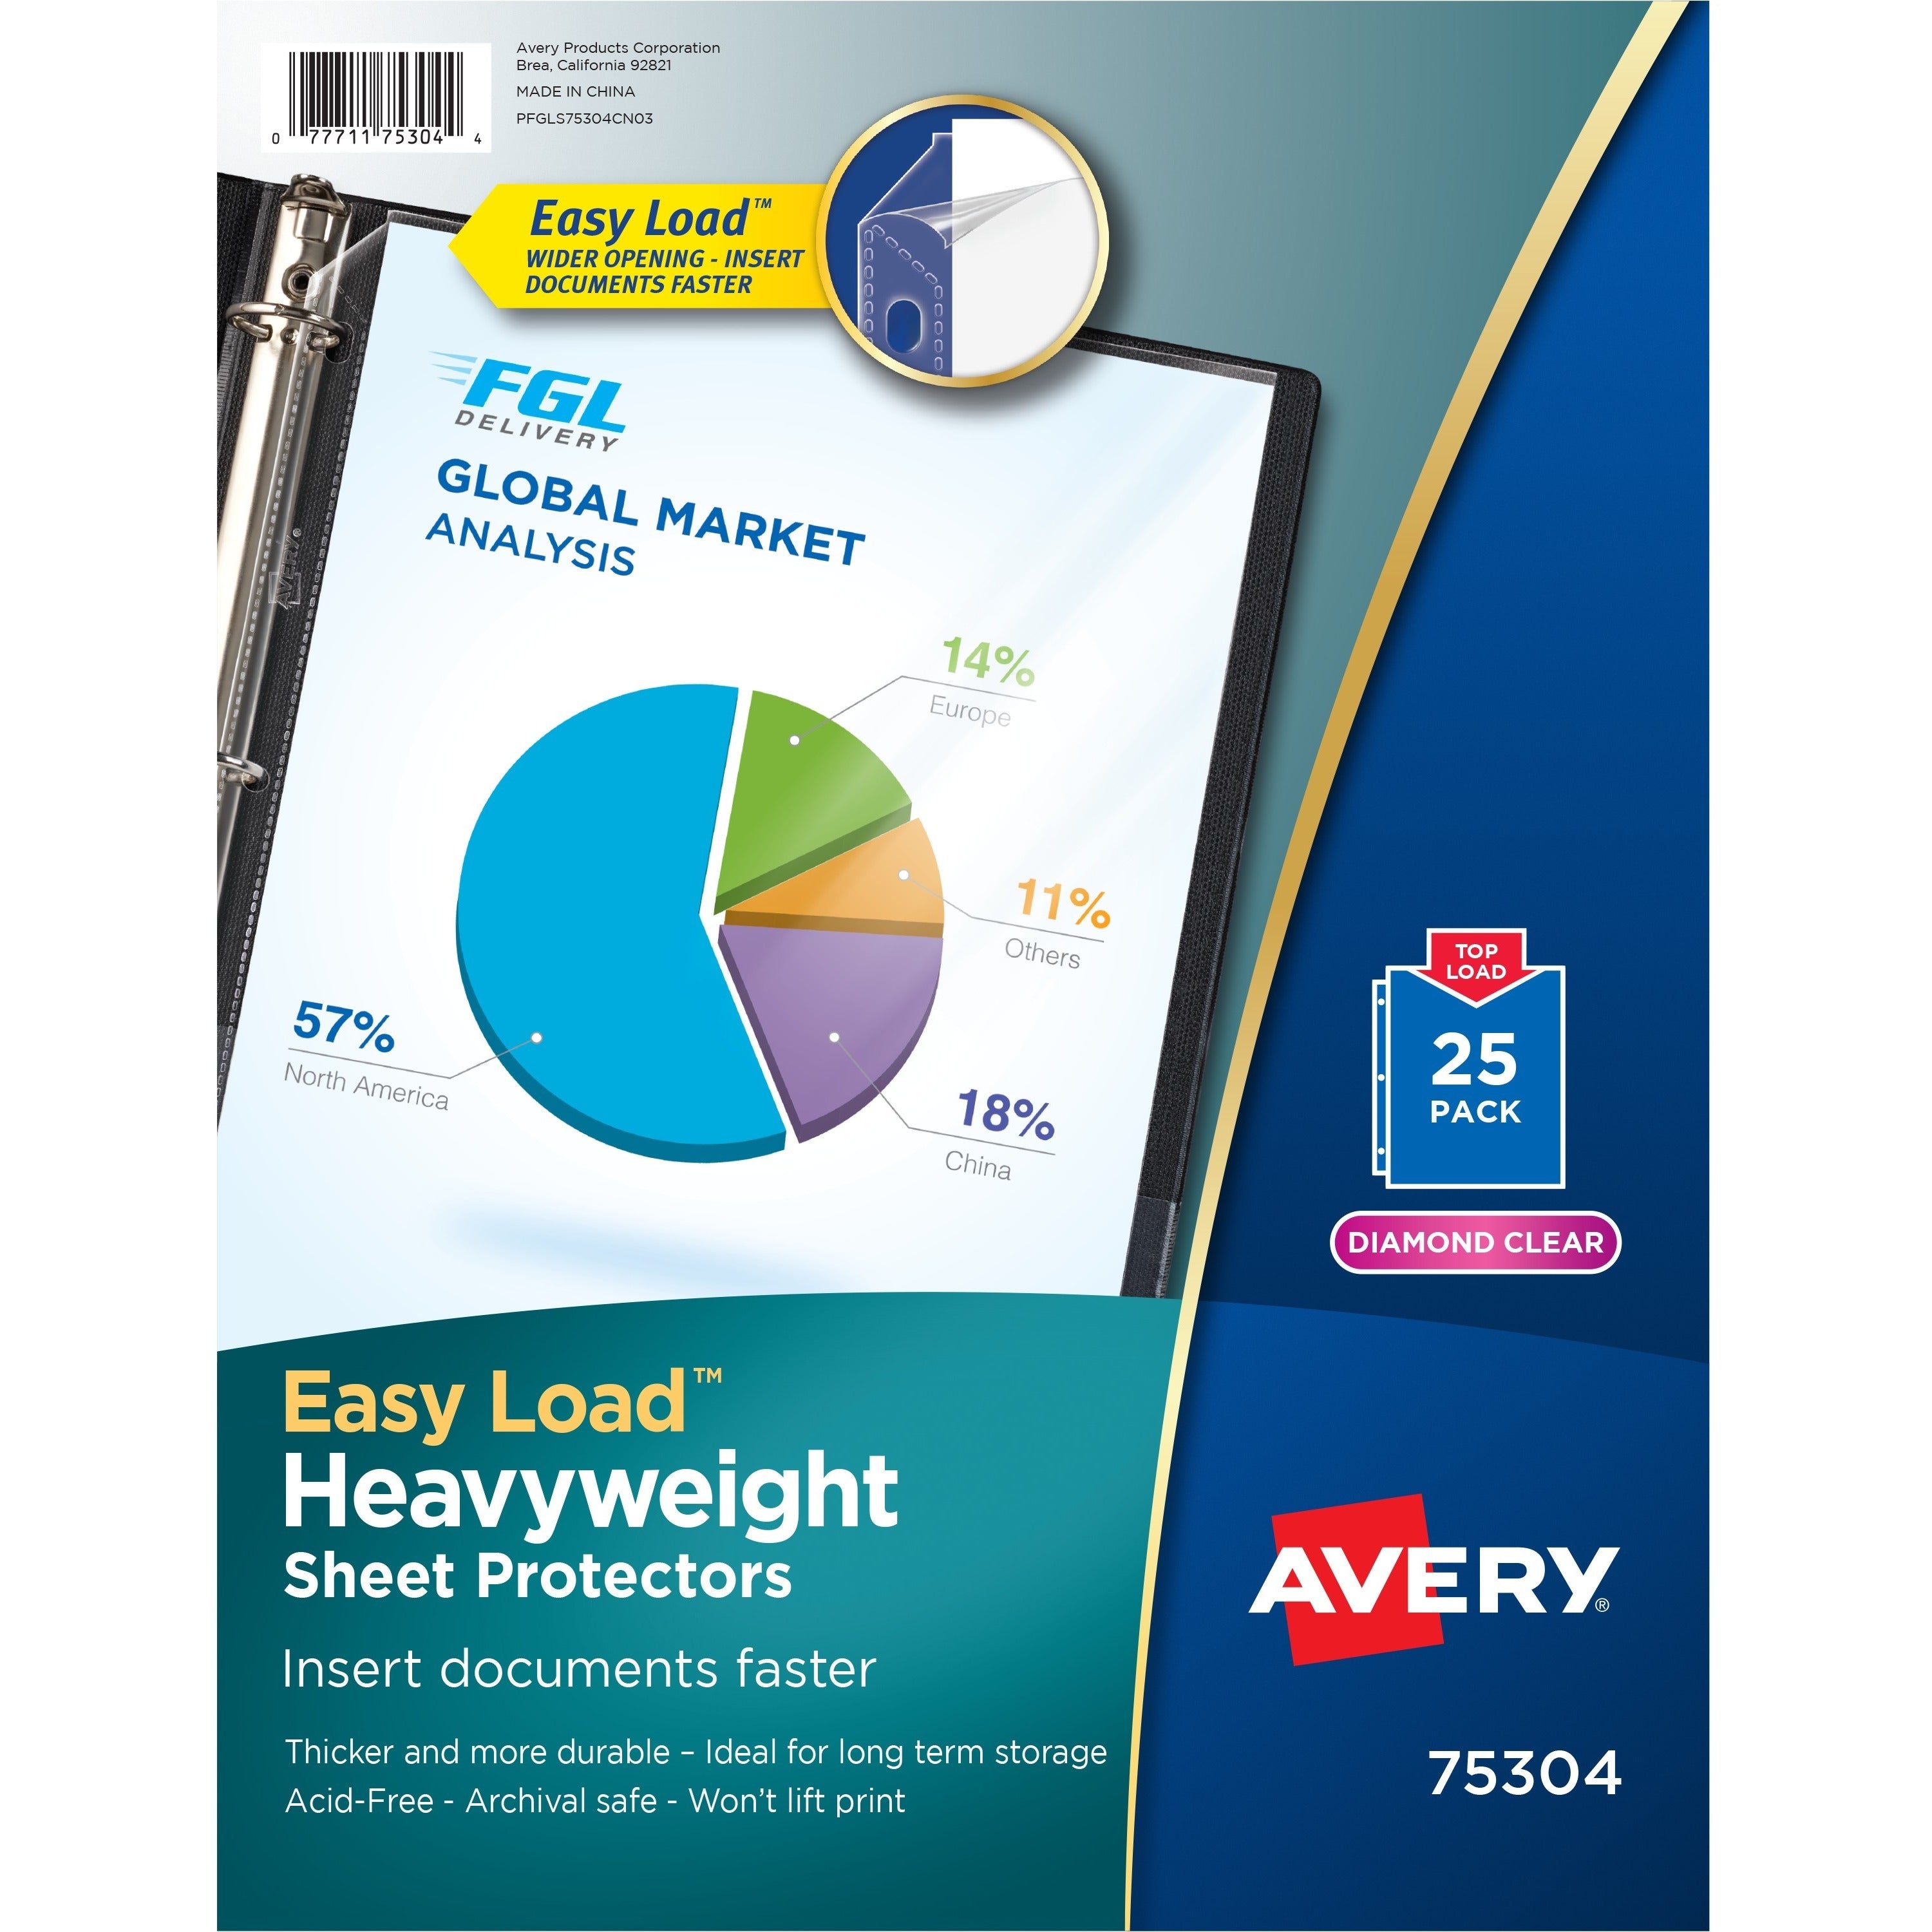 Avery Heavyweight Sheet Protectors -Acid-free - Sheet Capacity - For Letter 8 1/2" x 11" Sheet - Ring Binder - Top Loading - Diamond Clear - Polypropylene - 25 / Pack - 